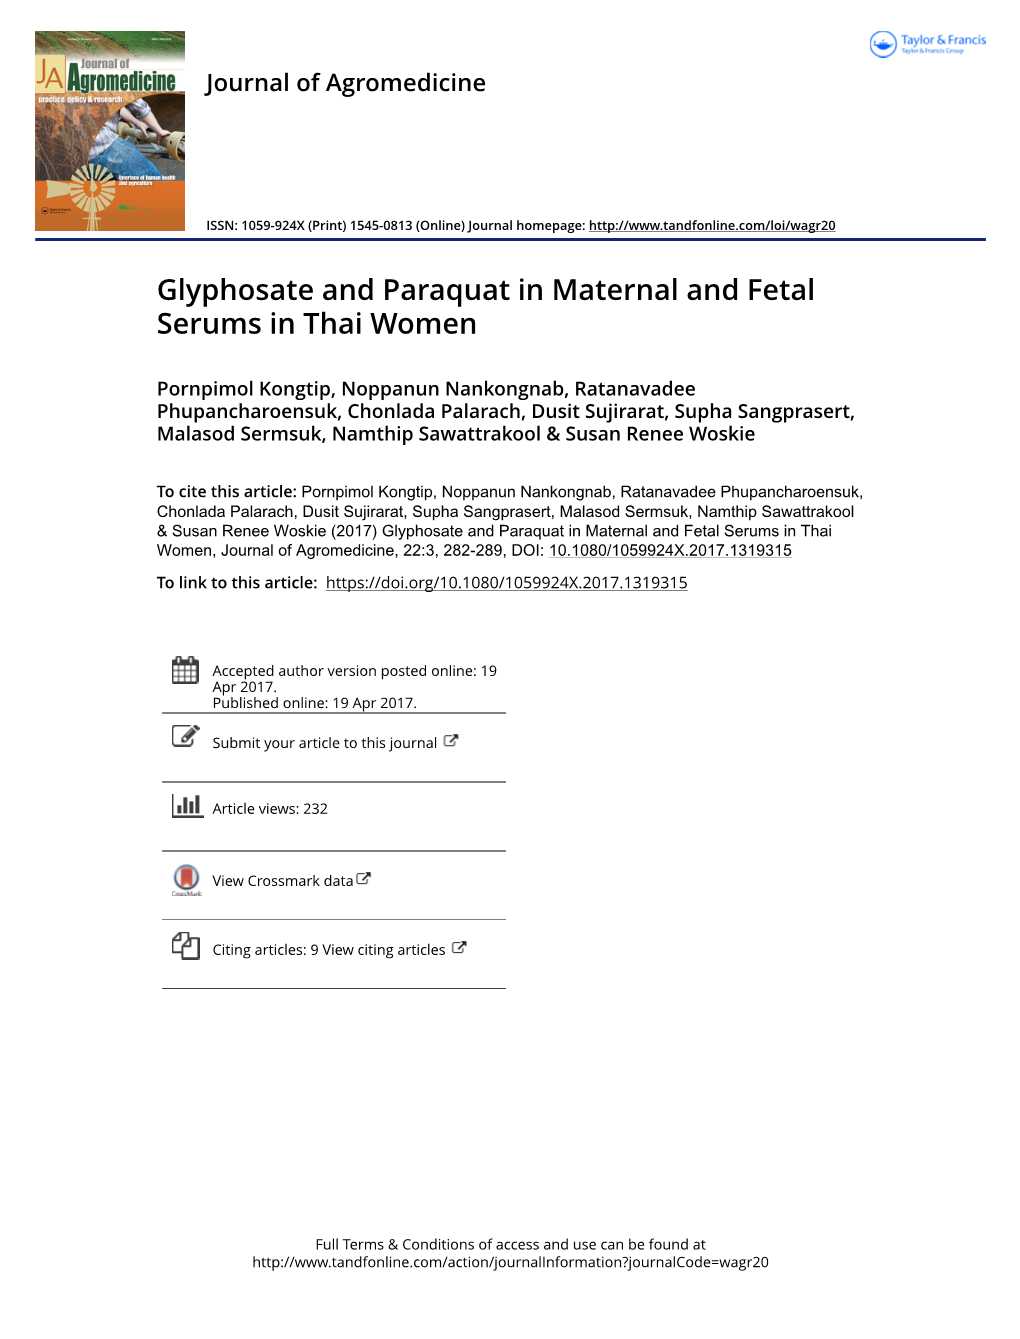 Glyphosate and Paraquat in Maternal and Fetal Serums in Thai Women